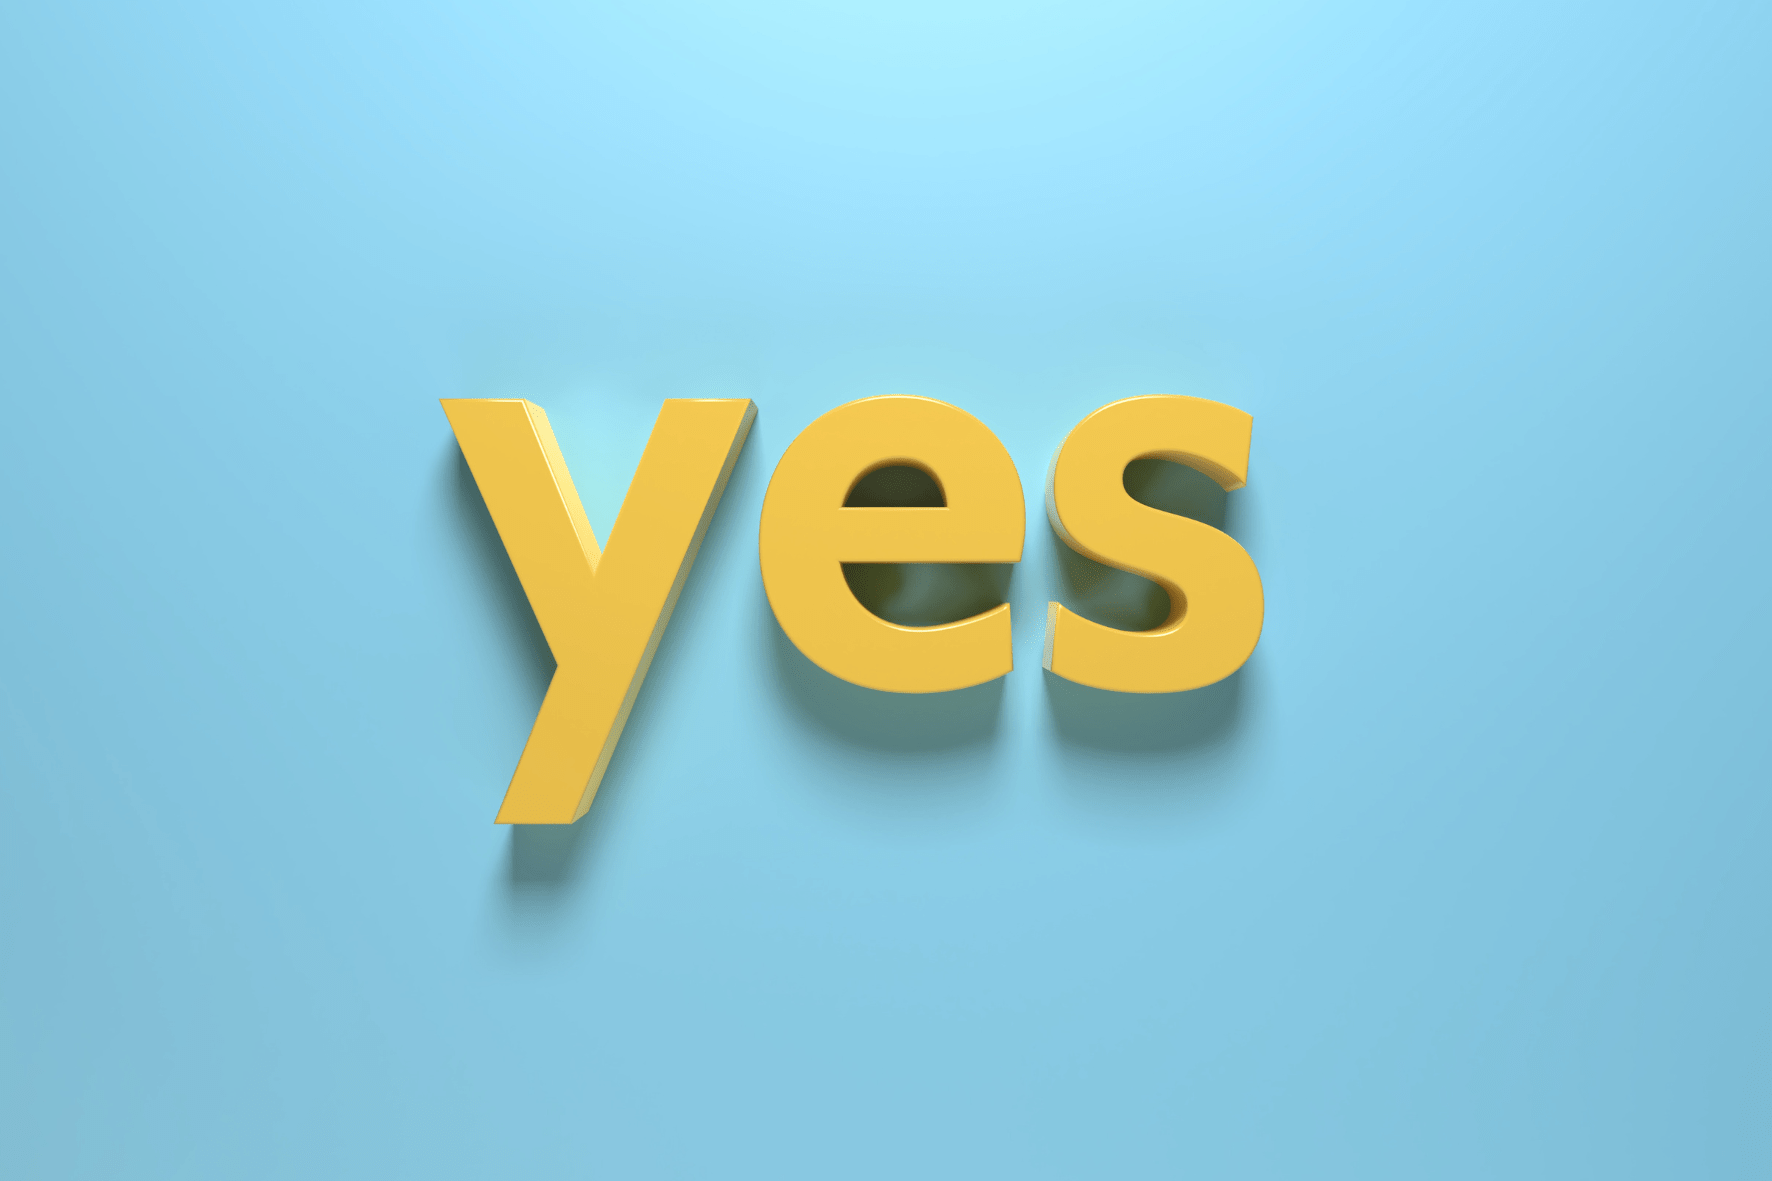 "Yes"